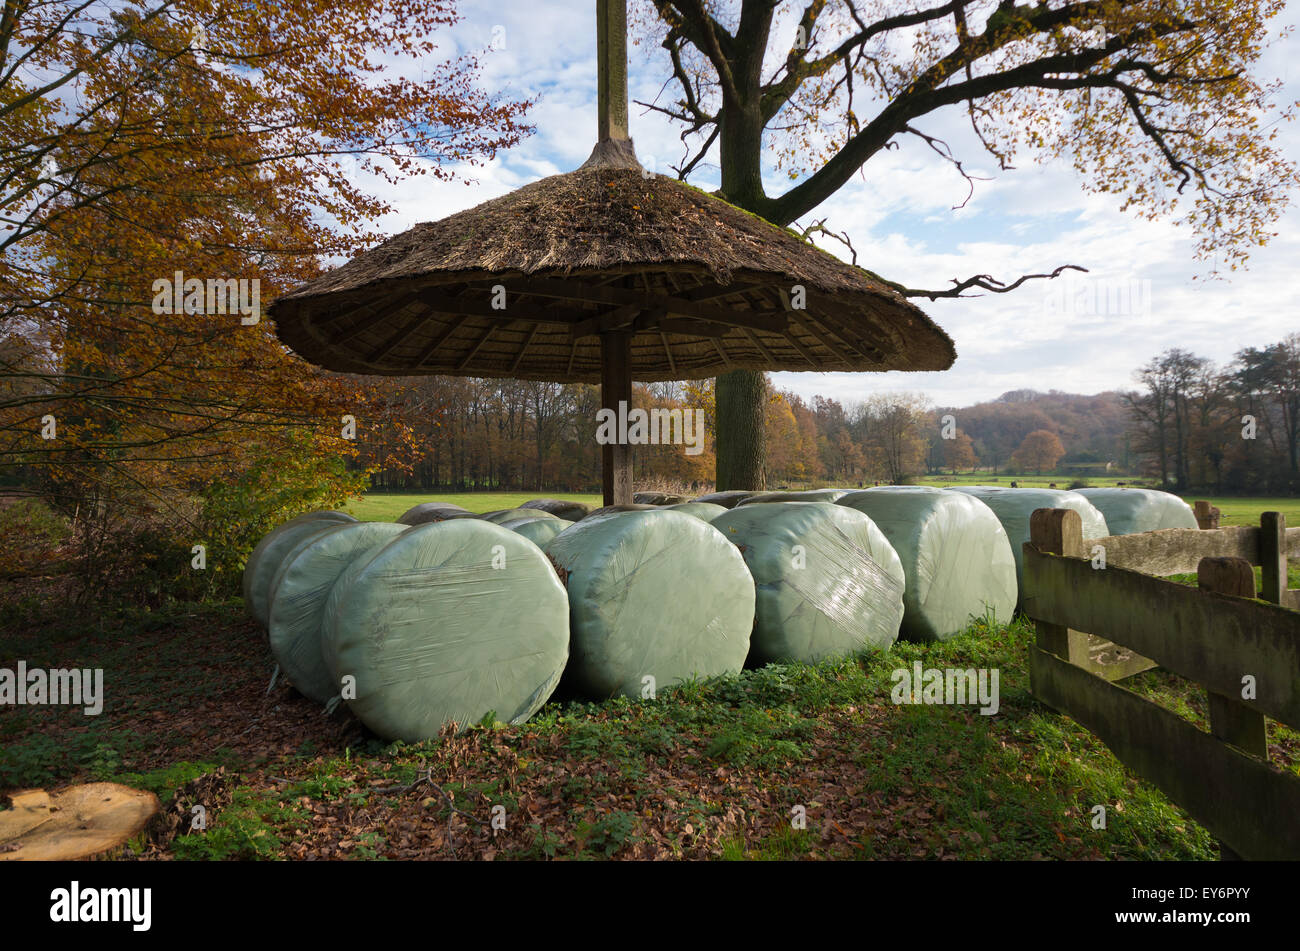 in plastic wrapped hay bales under a reed shelter Stock Photo